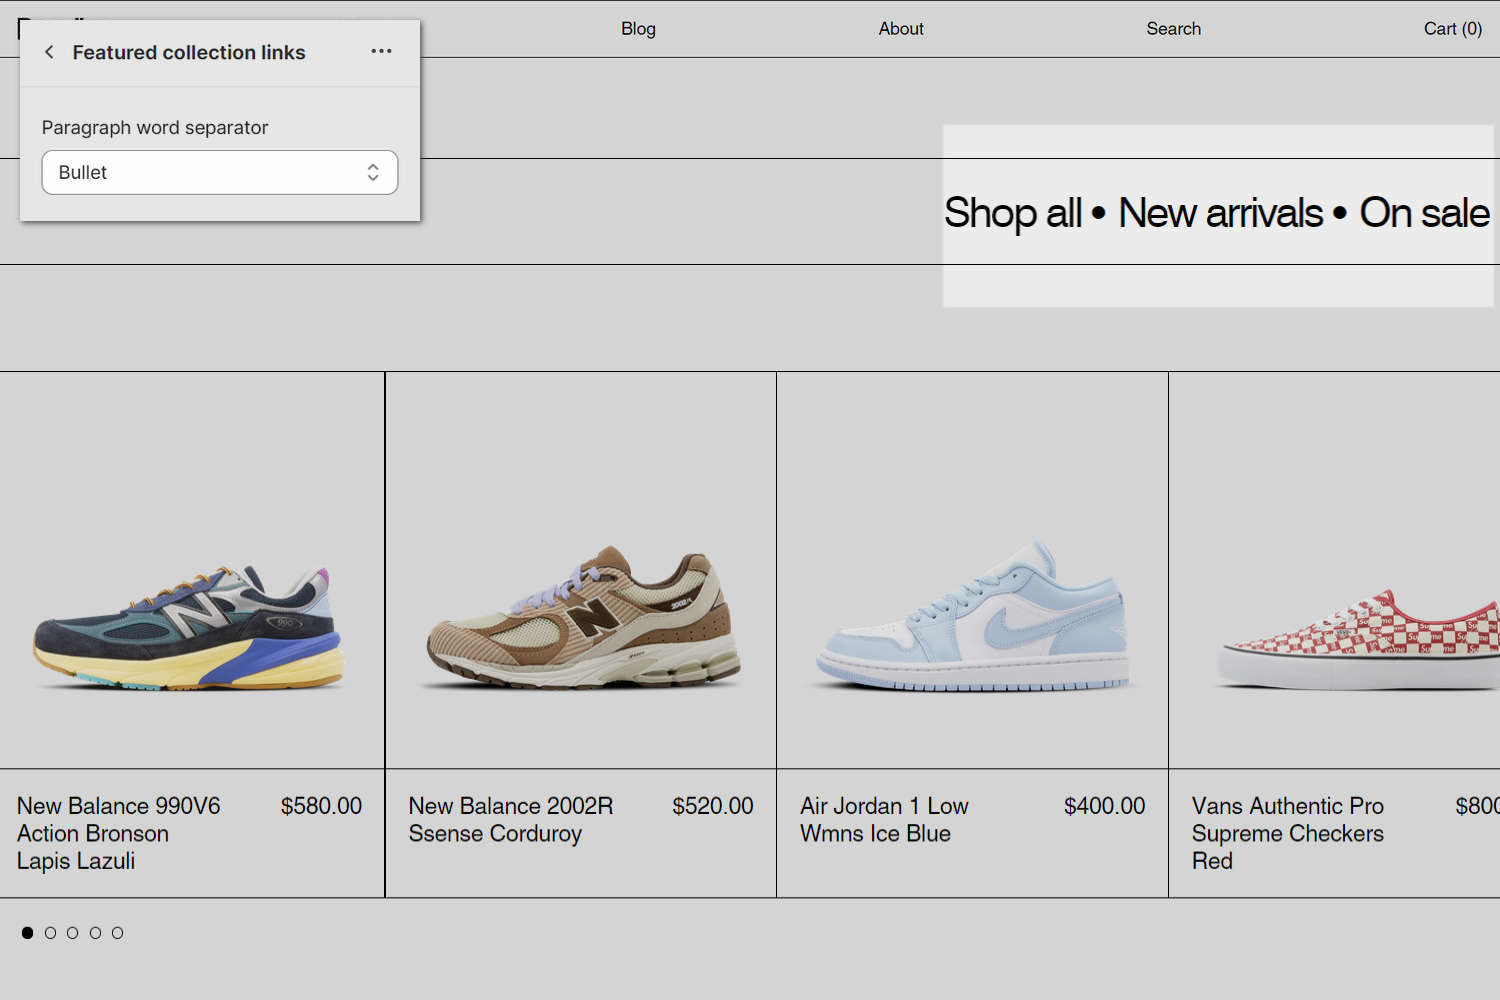 An example Featured collection links section on a store's home page.